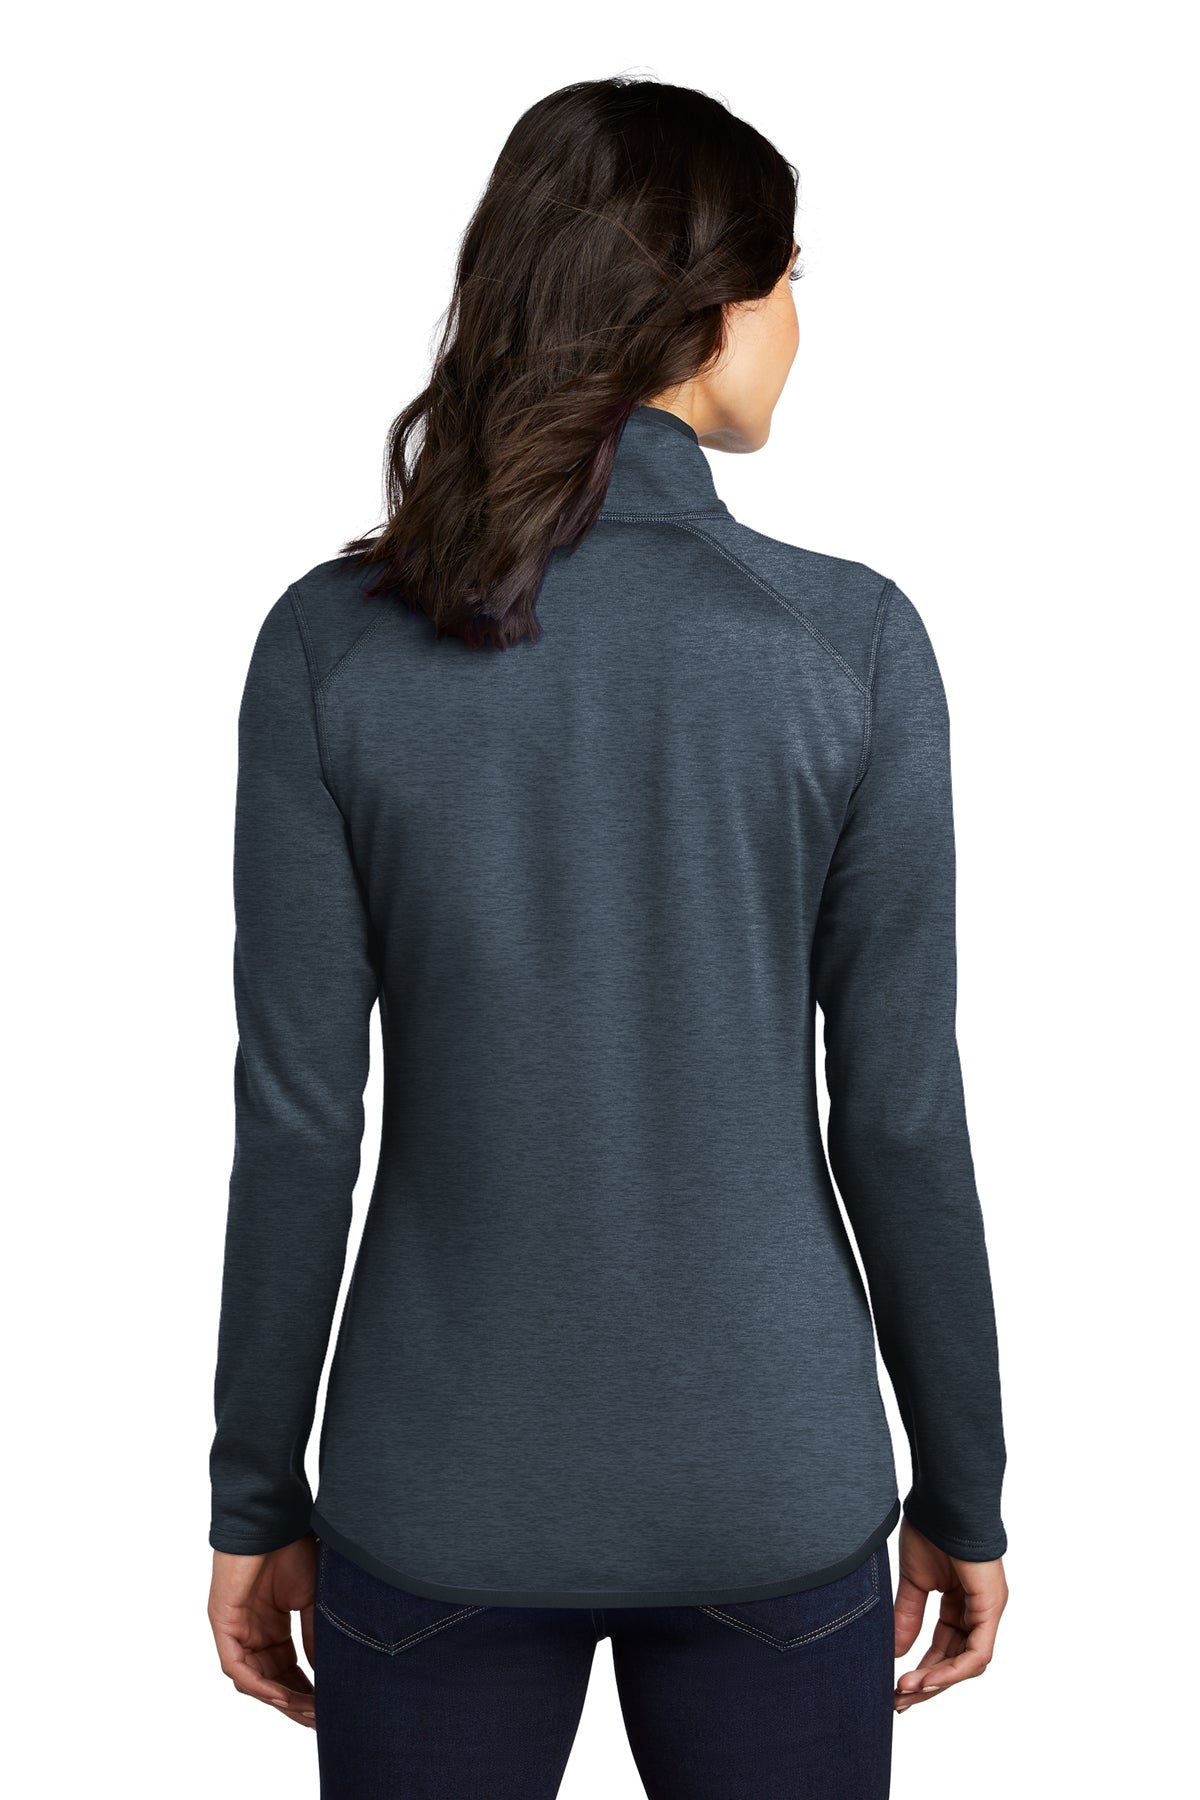 North Face Skyline Ladies Fleece Jacket, Urban Navy Heather [GuidePoint Security]